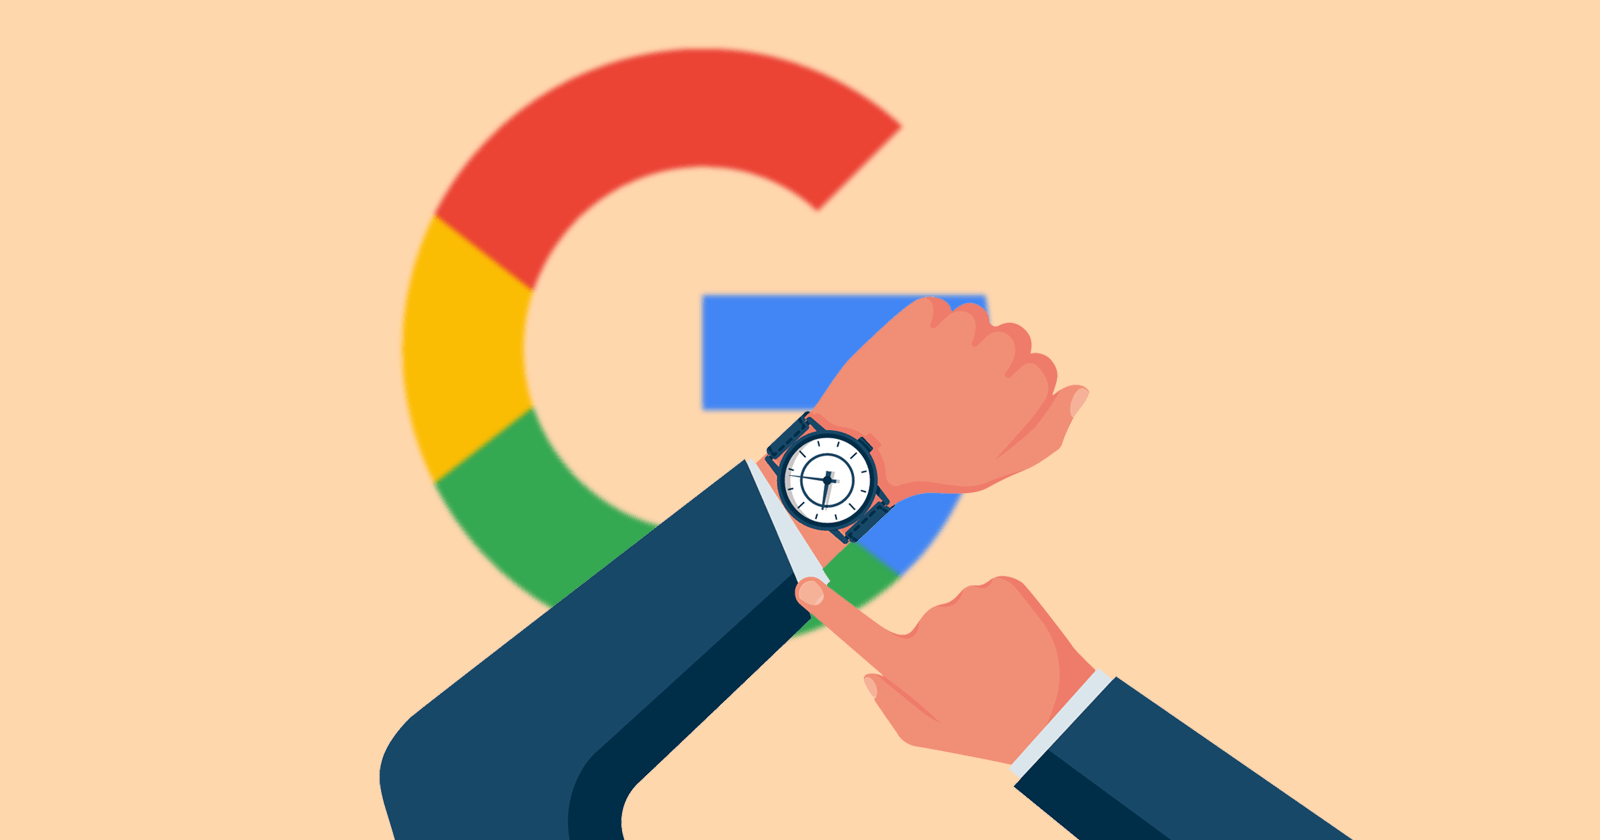 Changes to large sites takes time for Google to process